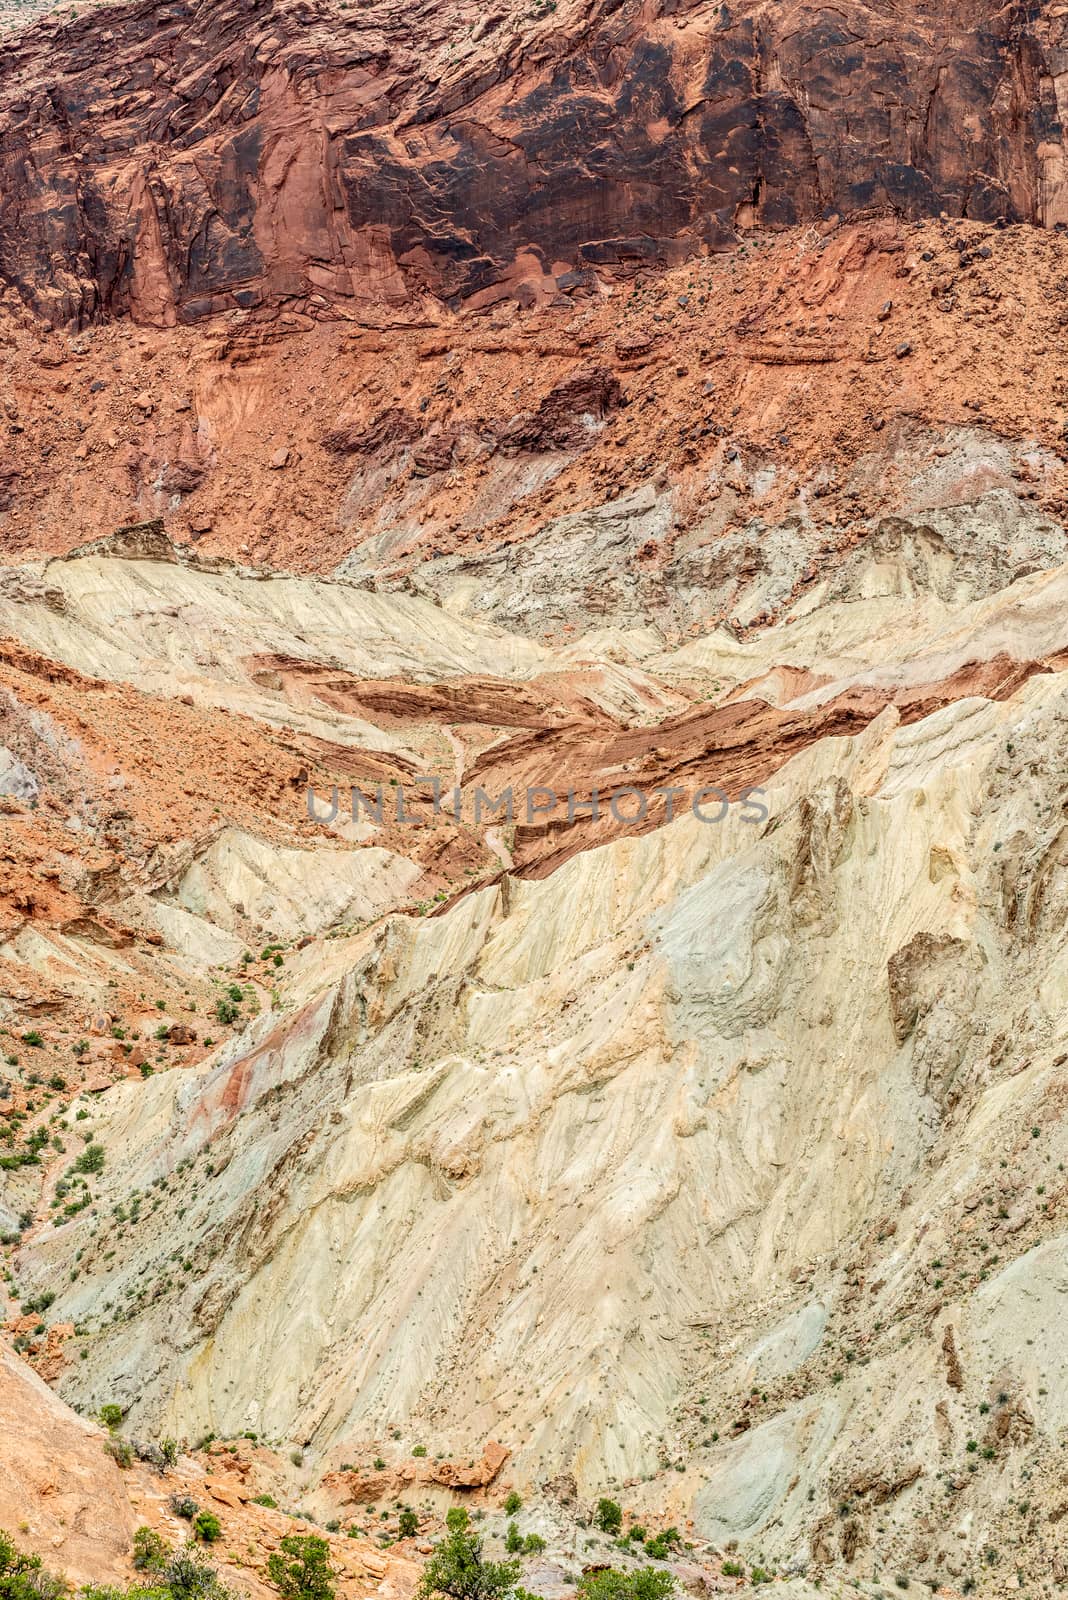 Overlook of Upheaval Dome in Canyonlands National Park, Utah by Njean